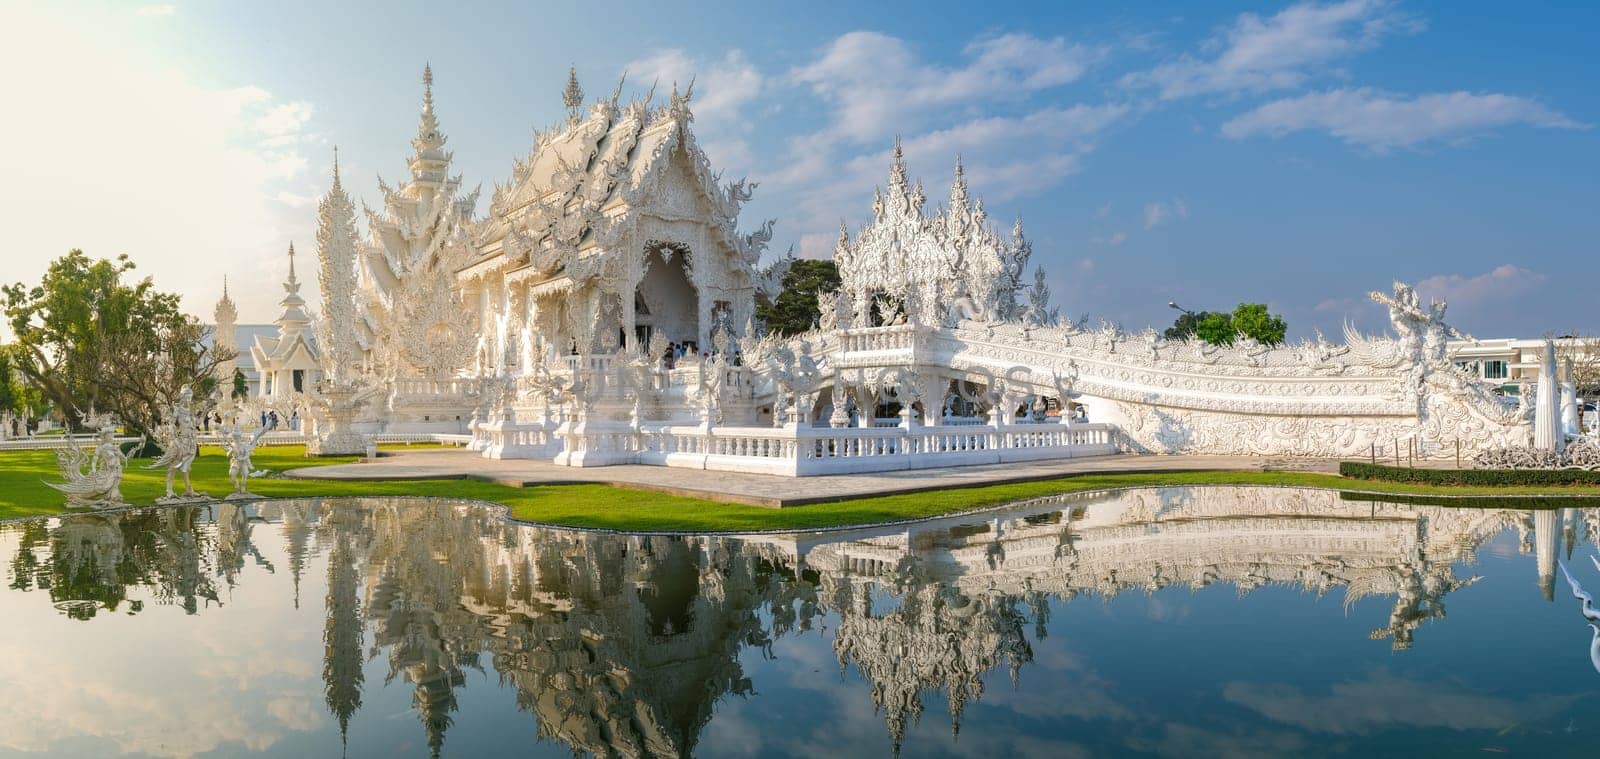 White Temple Chiang Rai Thailand, Wat Rong Khun Northern Thailand. beautiful reflection in the pond with soft sunlight